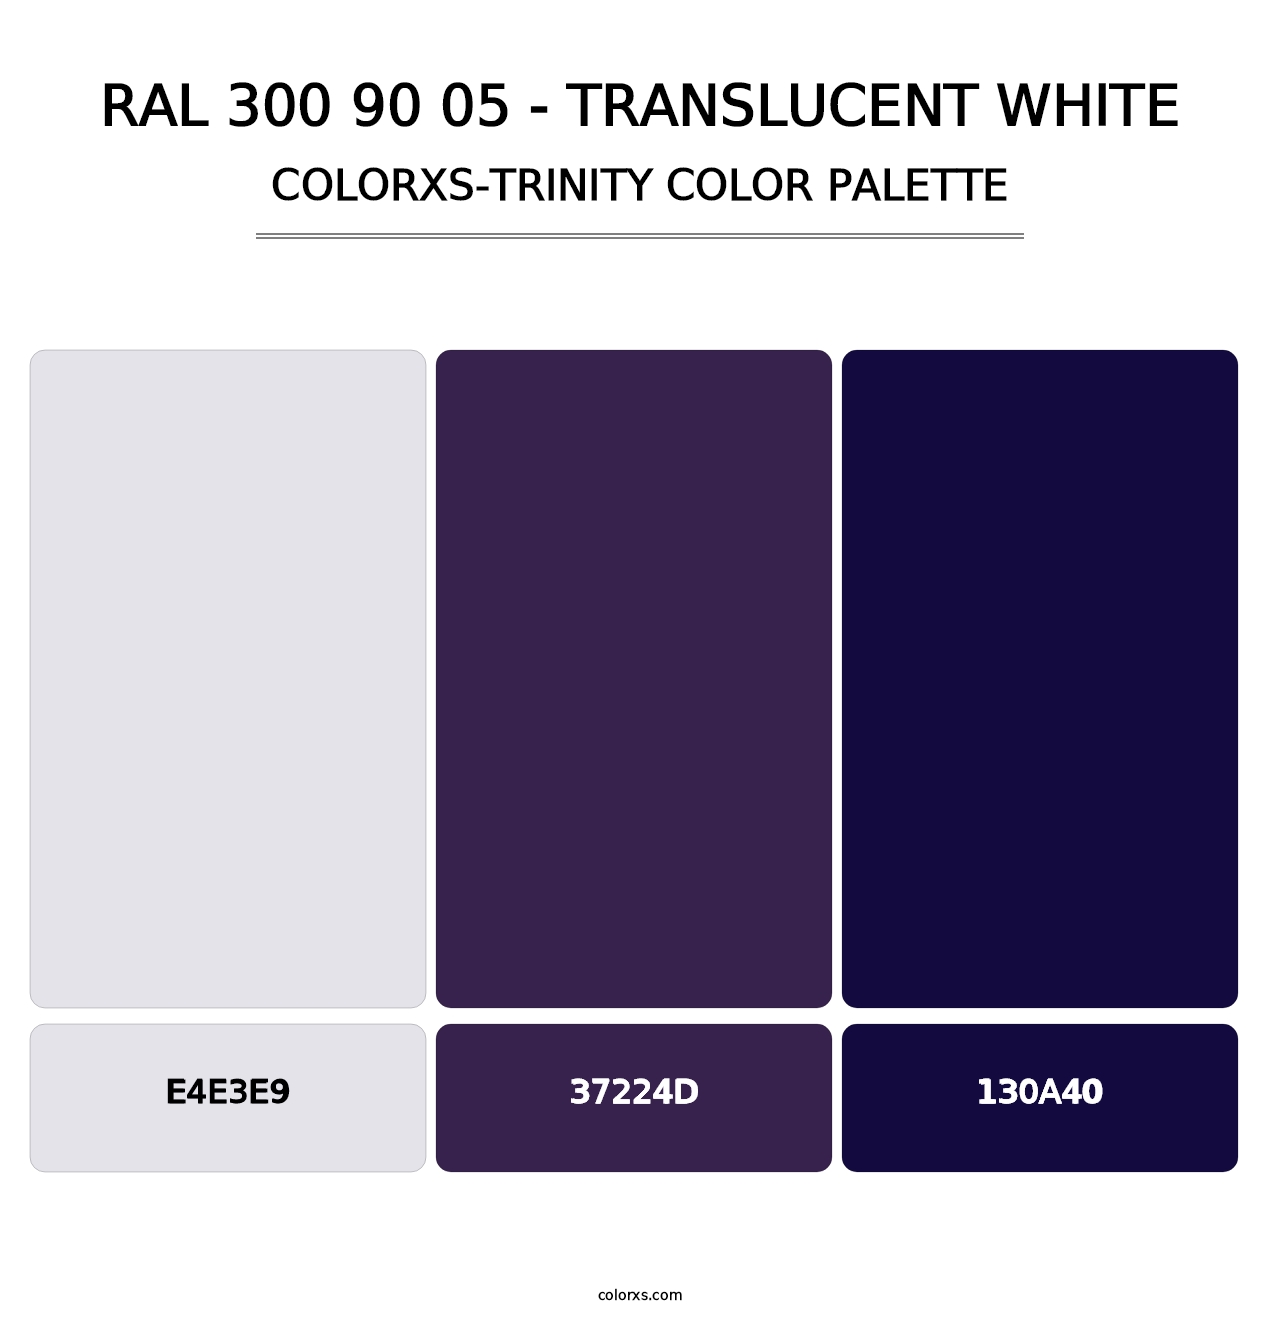 RAL 300 90 05 - Translucent White - Colorxs Trinity Palette